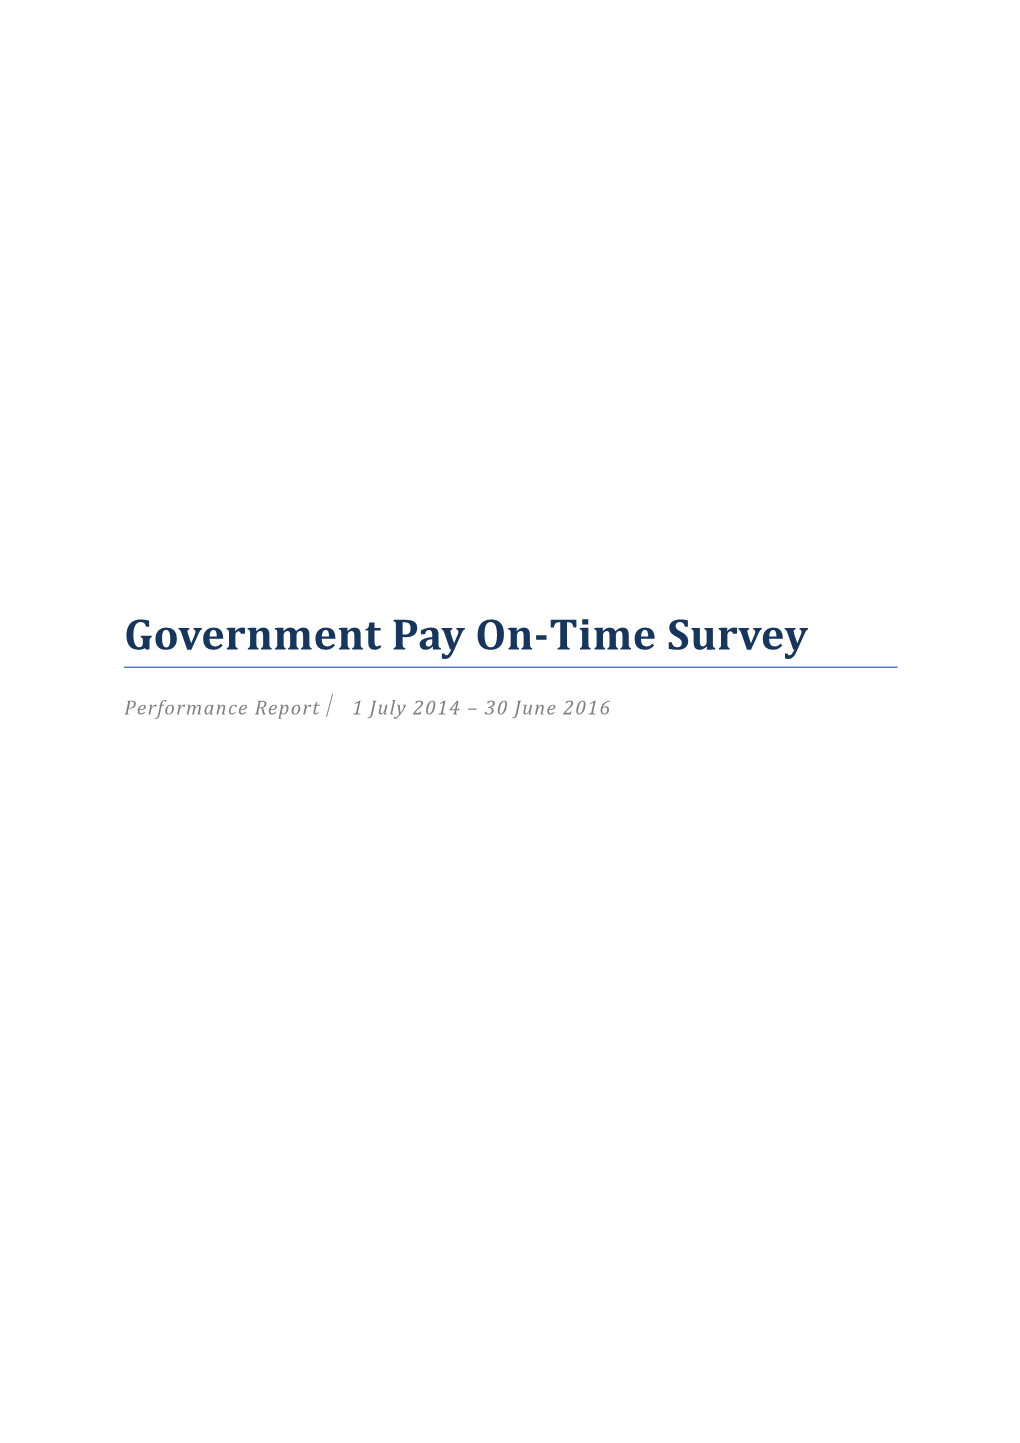 Australian Government Pay On-Time Survey: Performance Report 1 July 2014 - 30 June 2016